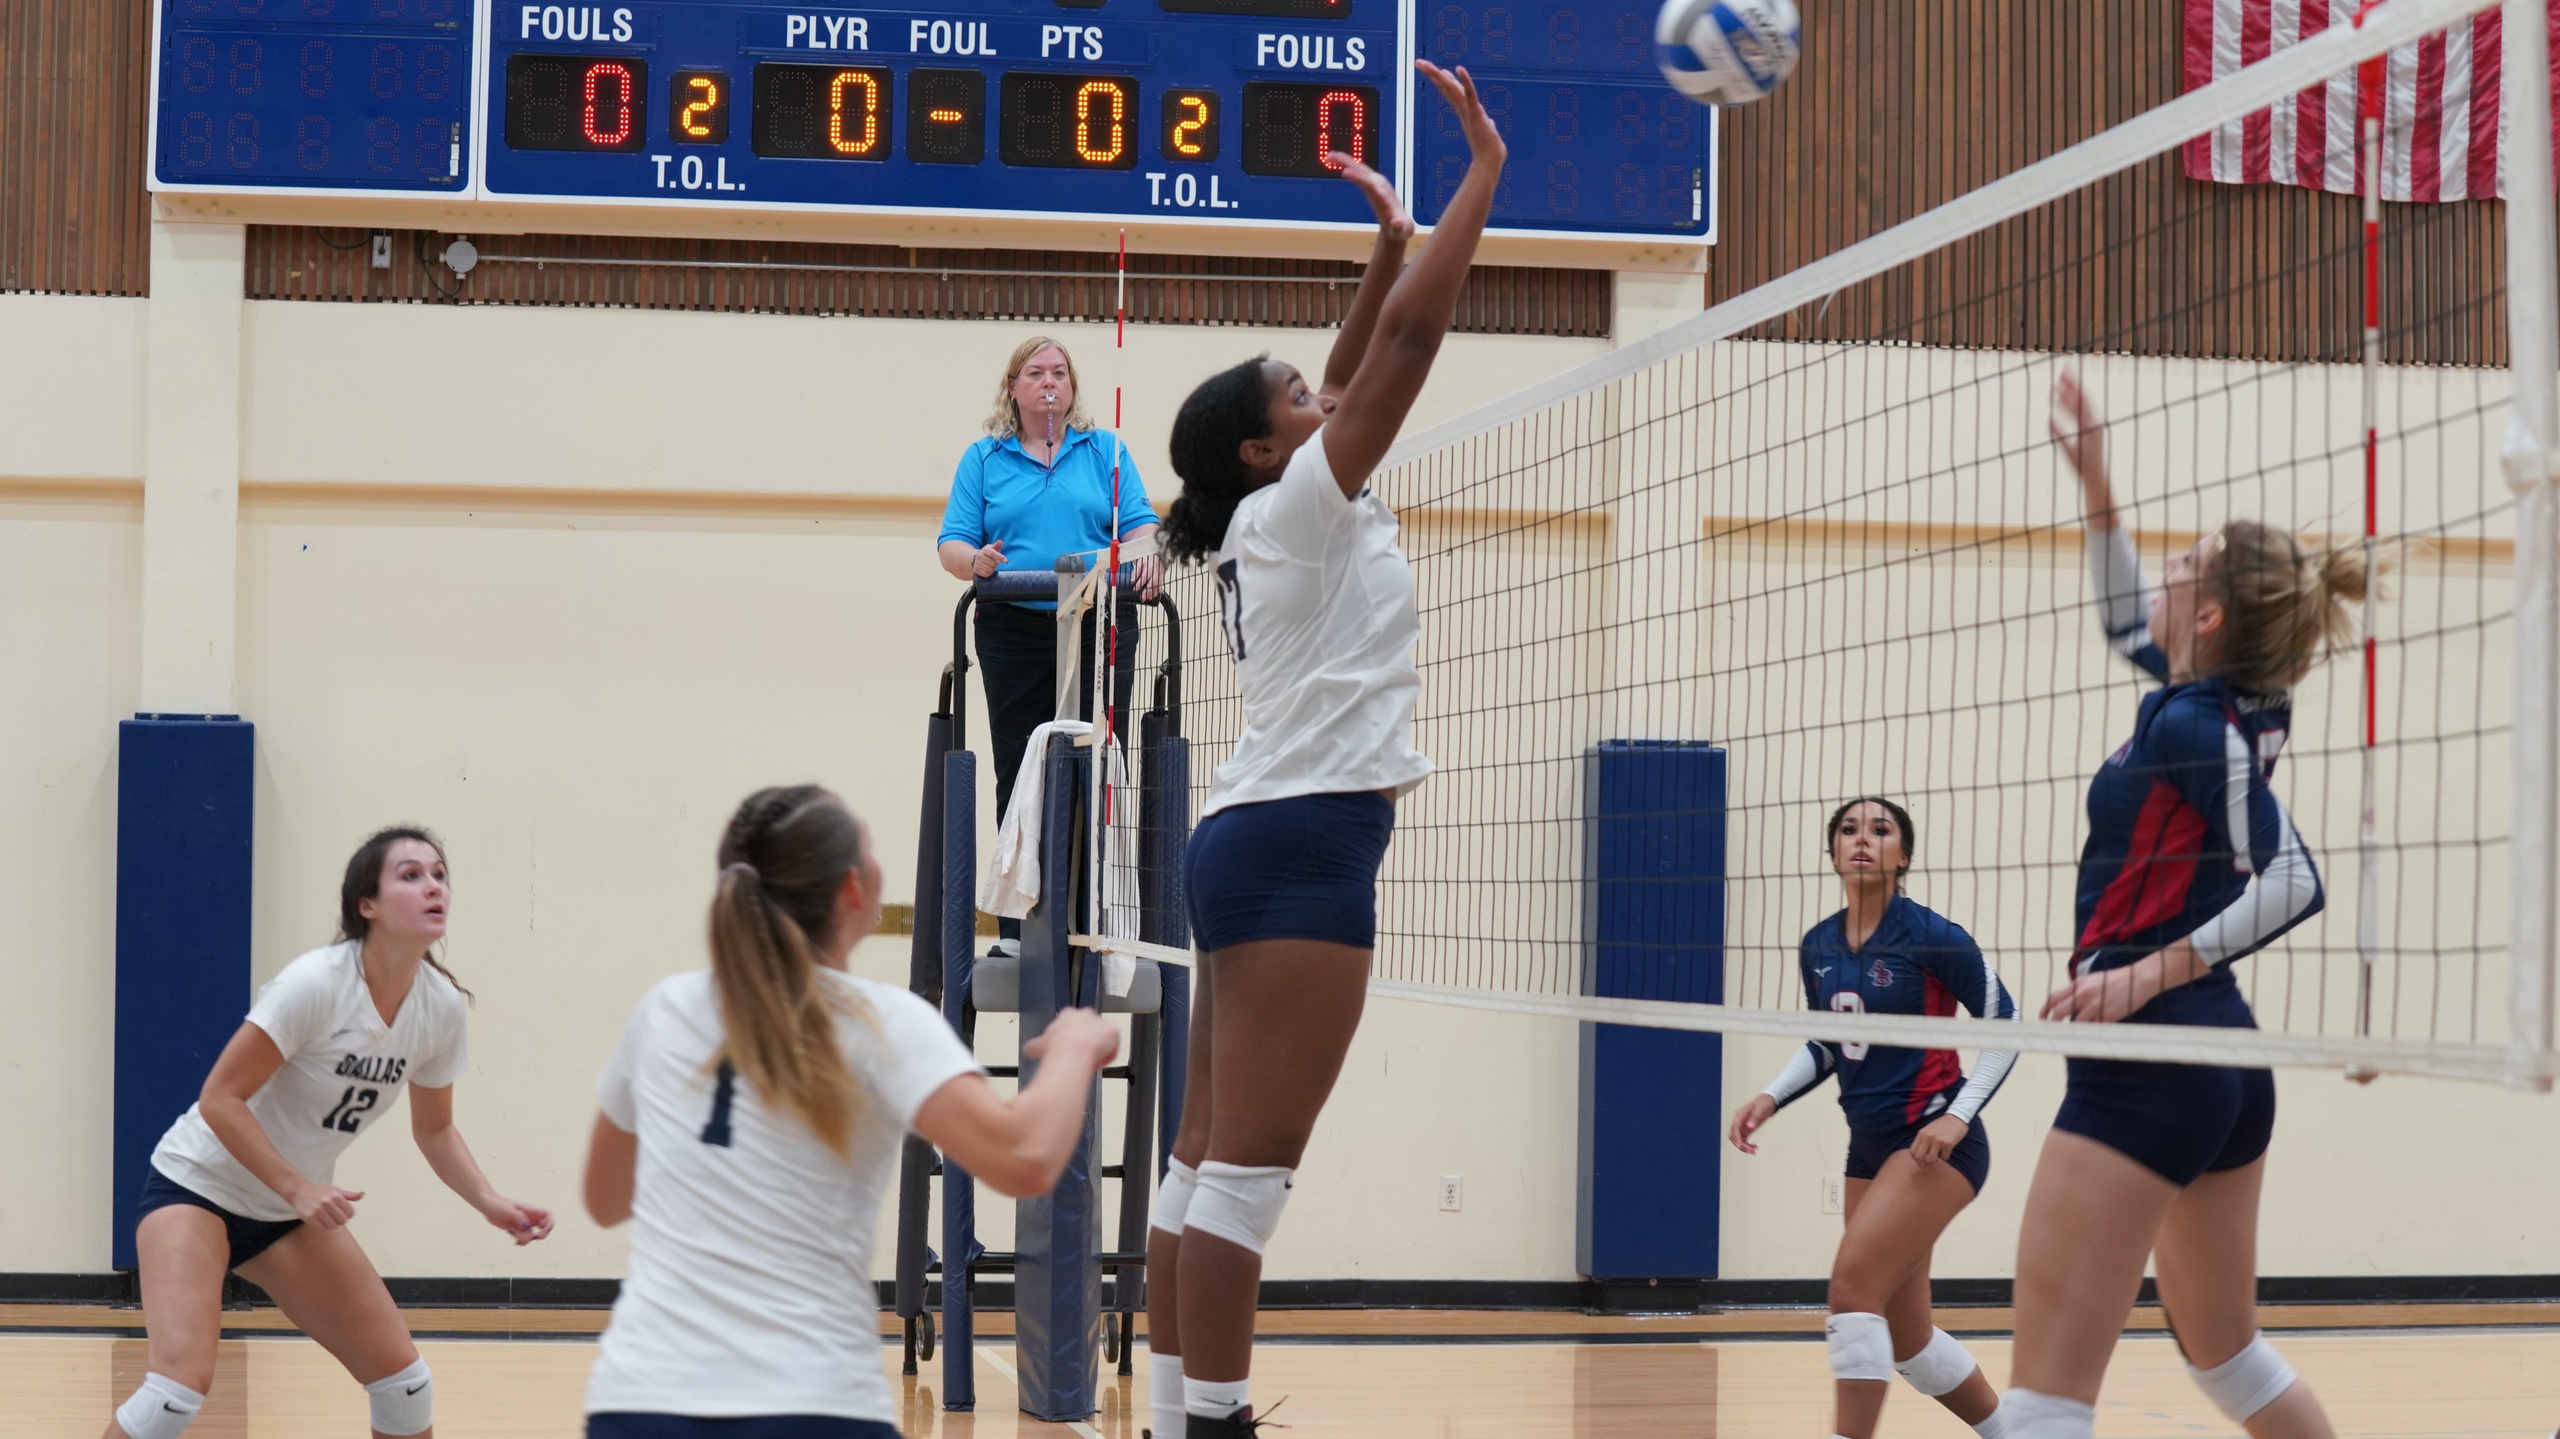 Women's Volleyball Suffers Road Defeat to LeTourneau